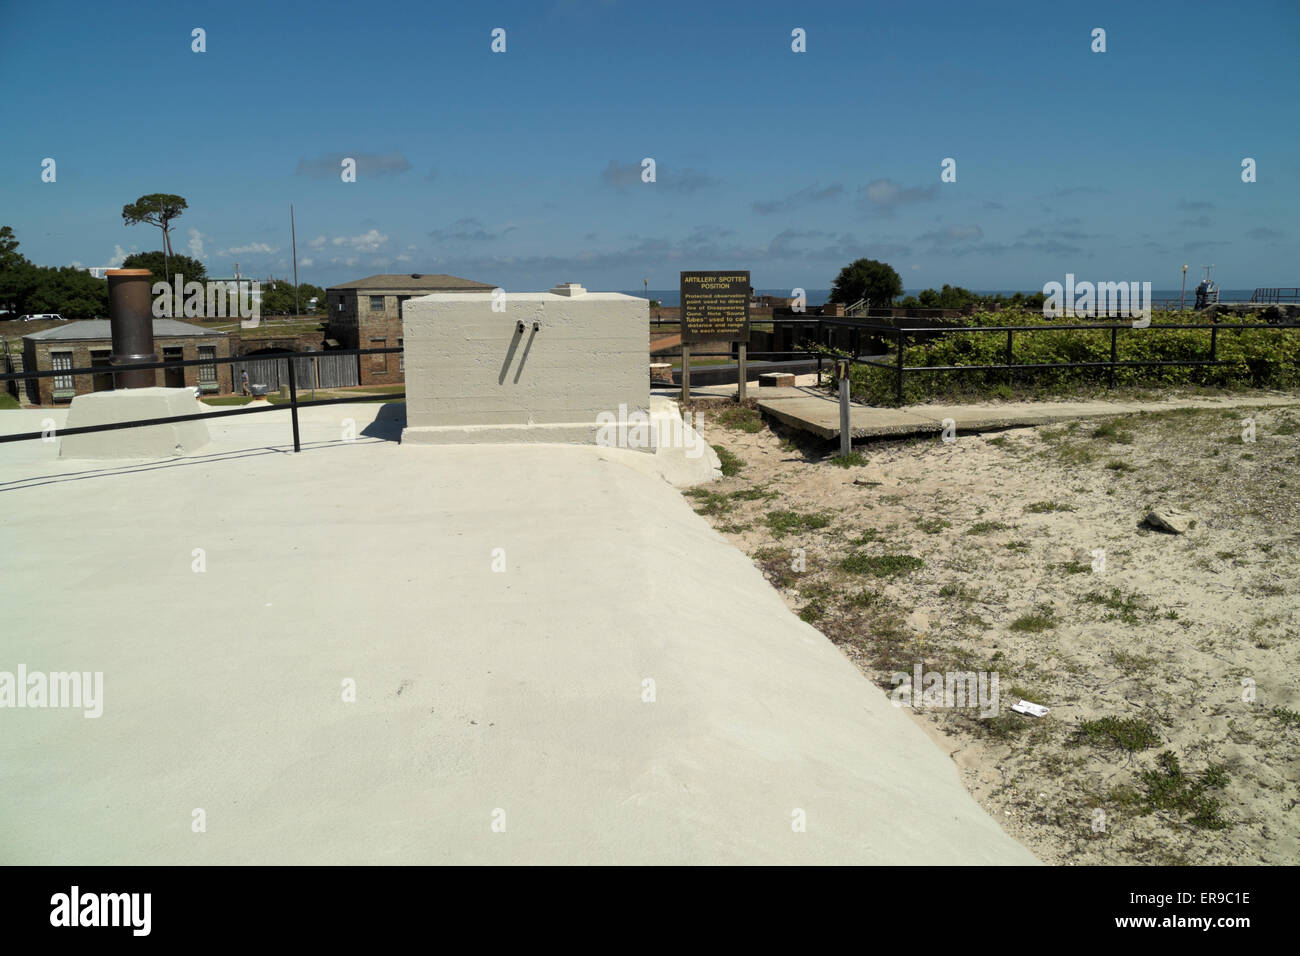 Artillery spotter position for disappearing guns at Fort Gaines located at Dauphin Island, Alabama. Stock Photo